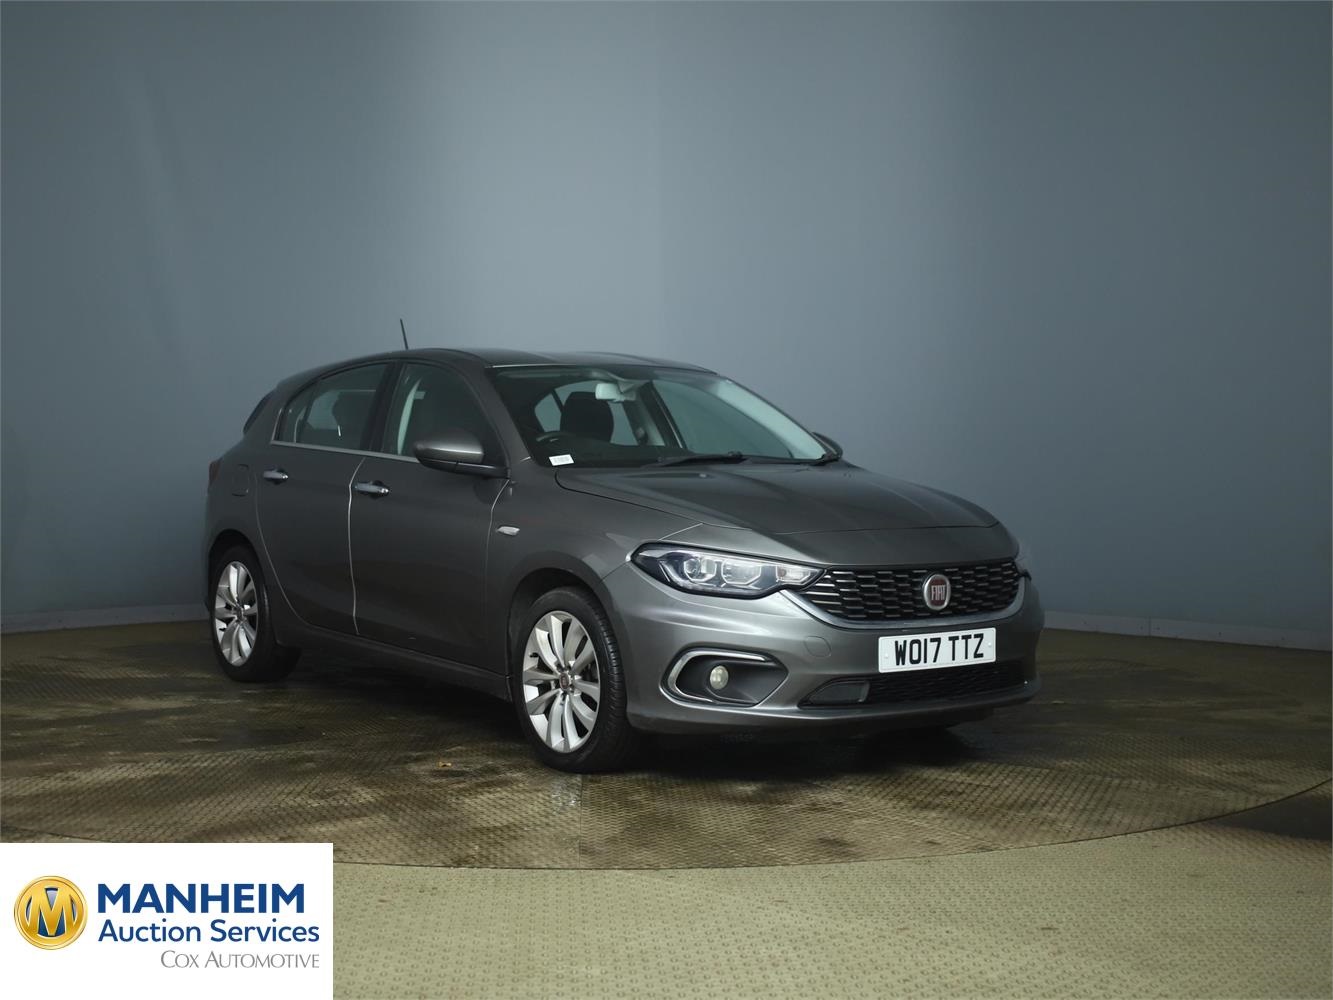 FIAT
TIPO
1.4 Lounge 5dr